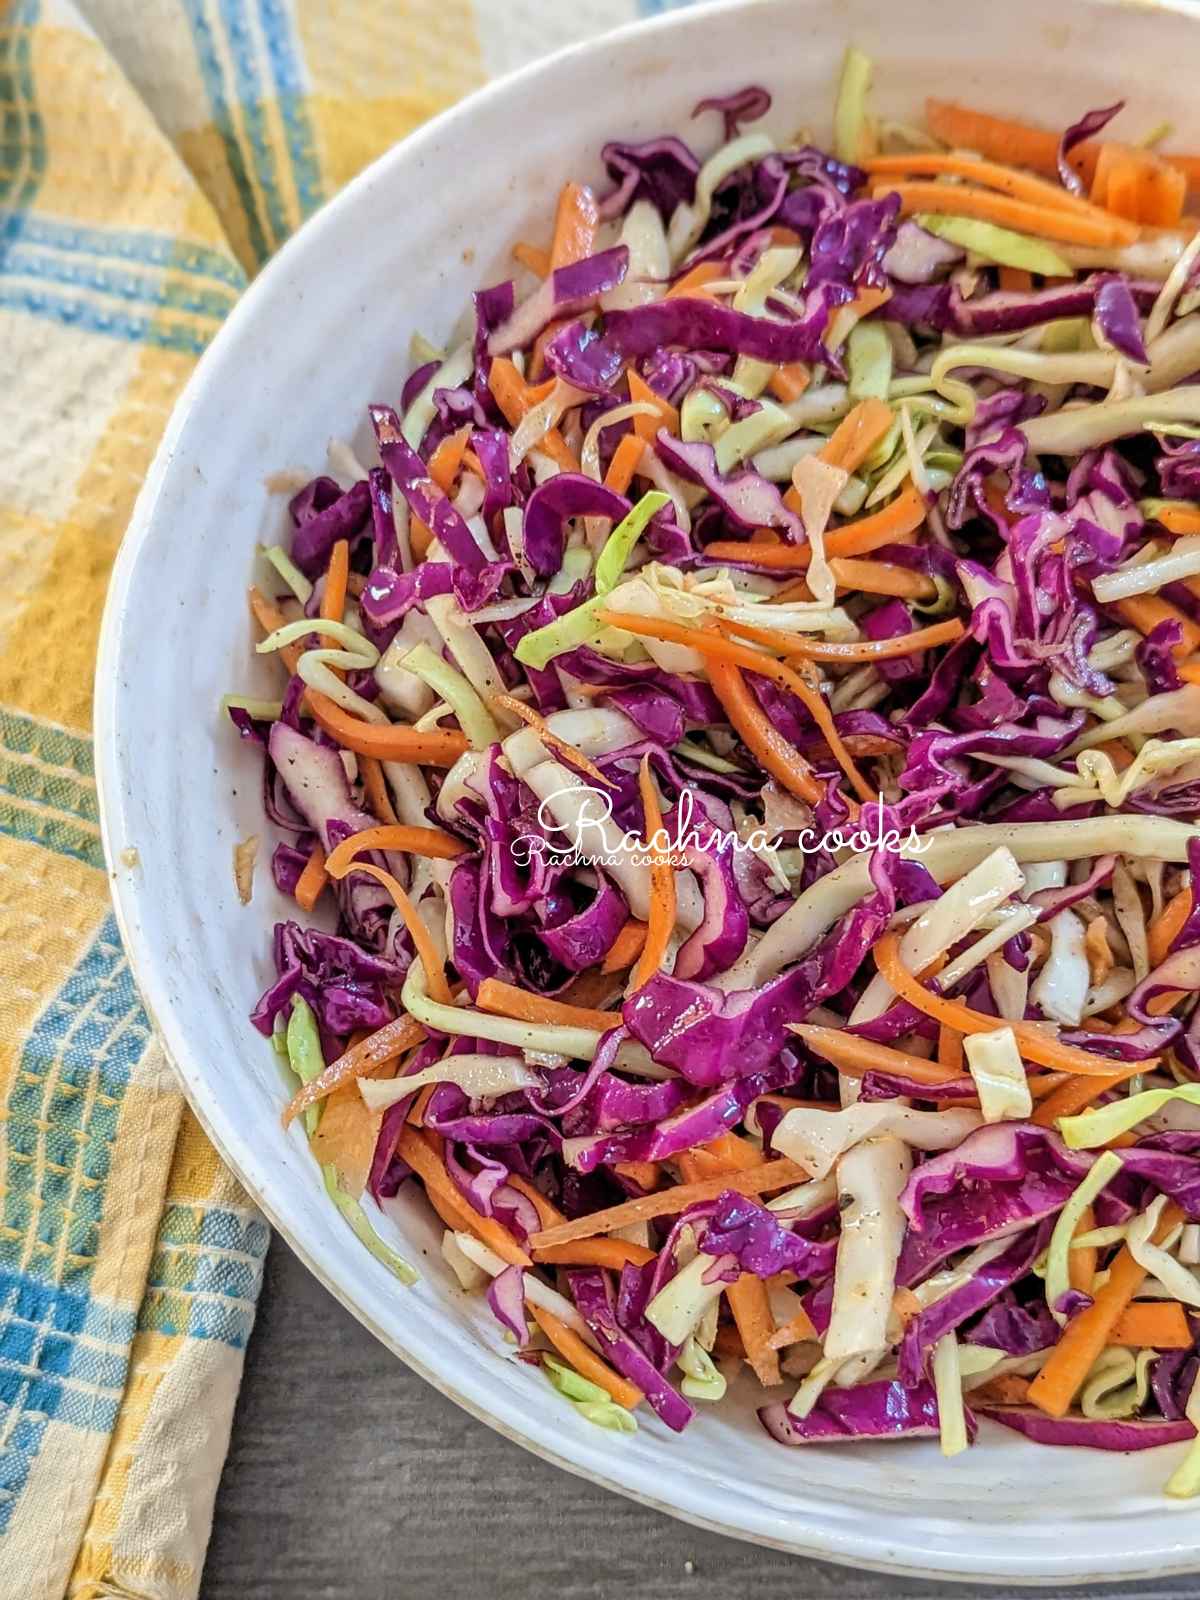 Cabbage and carrot salad served in a large white salad bowl.